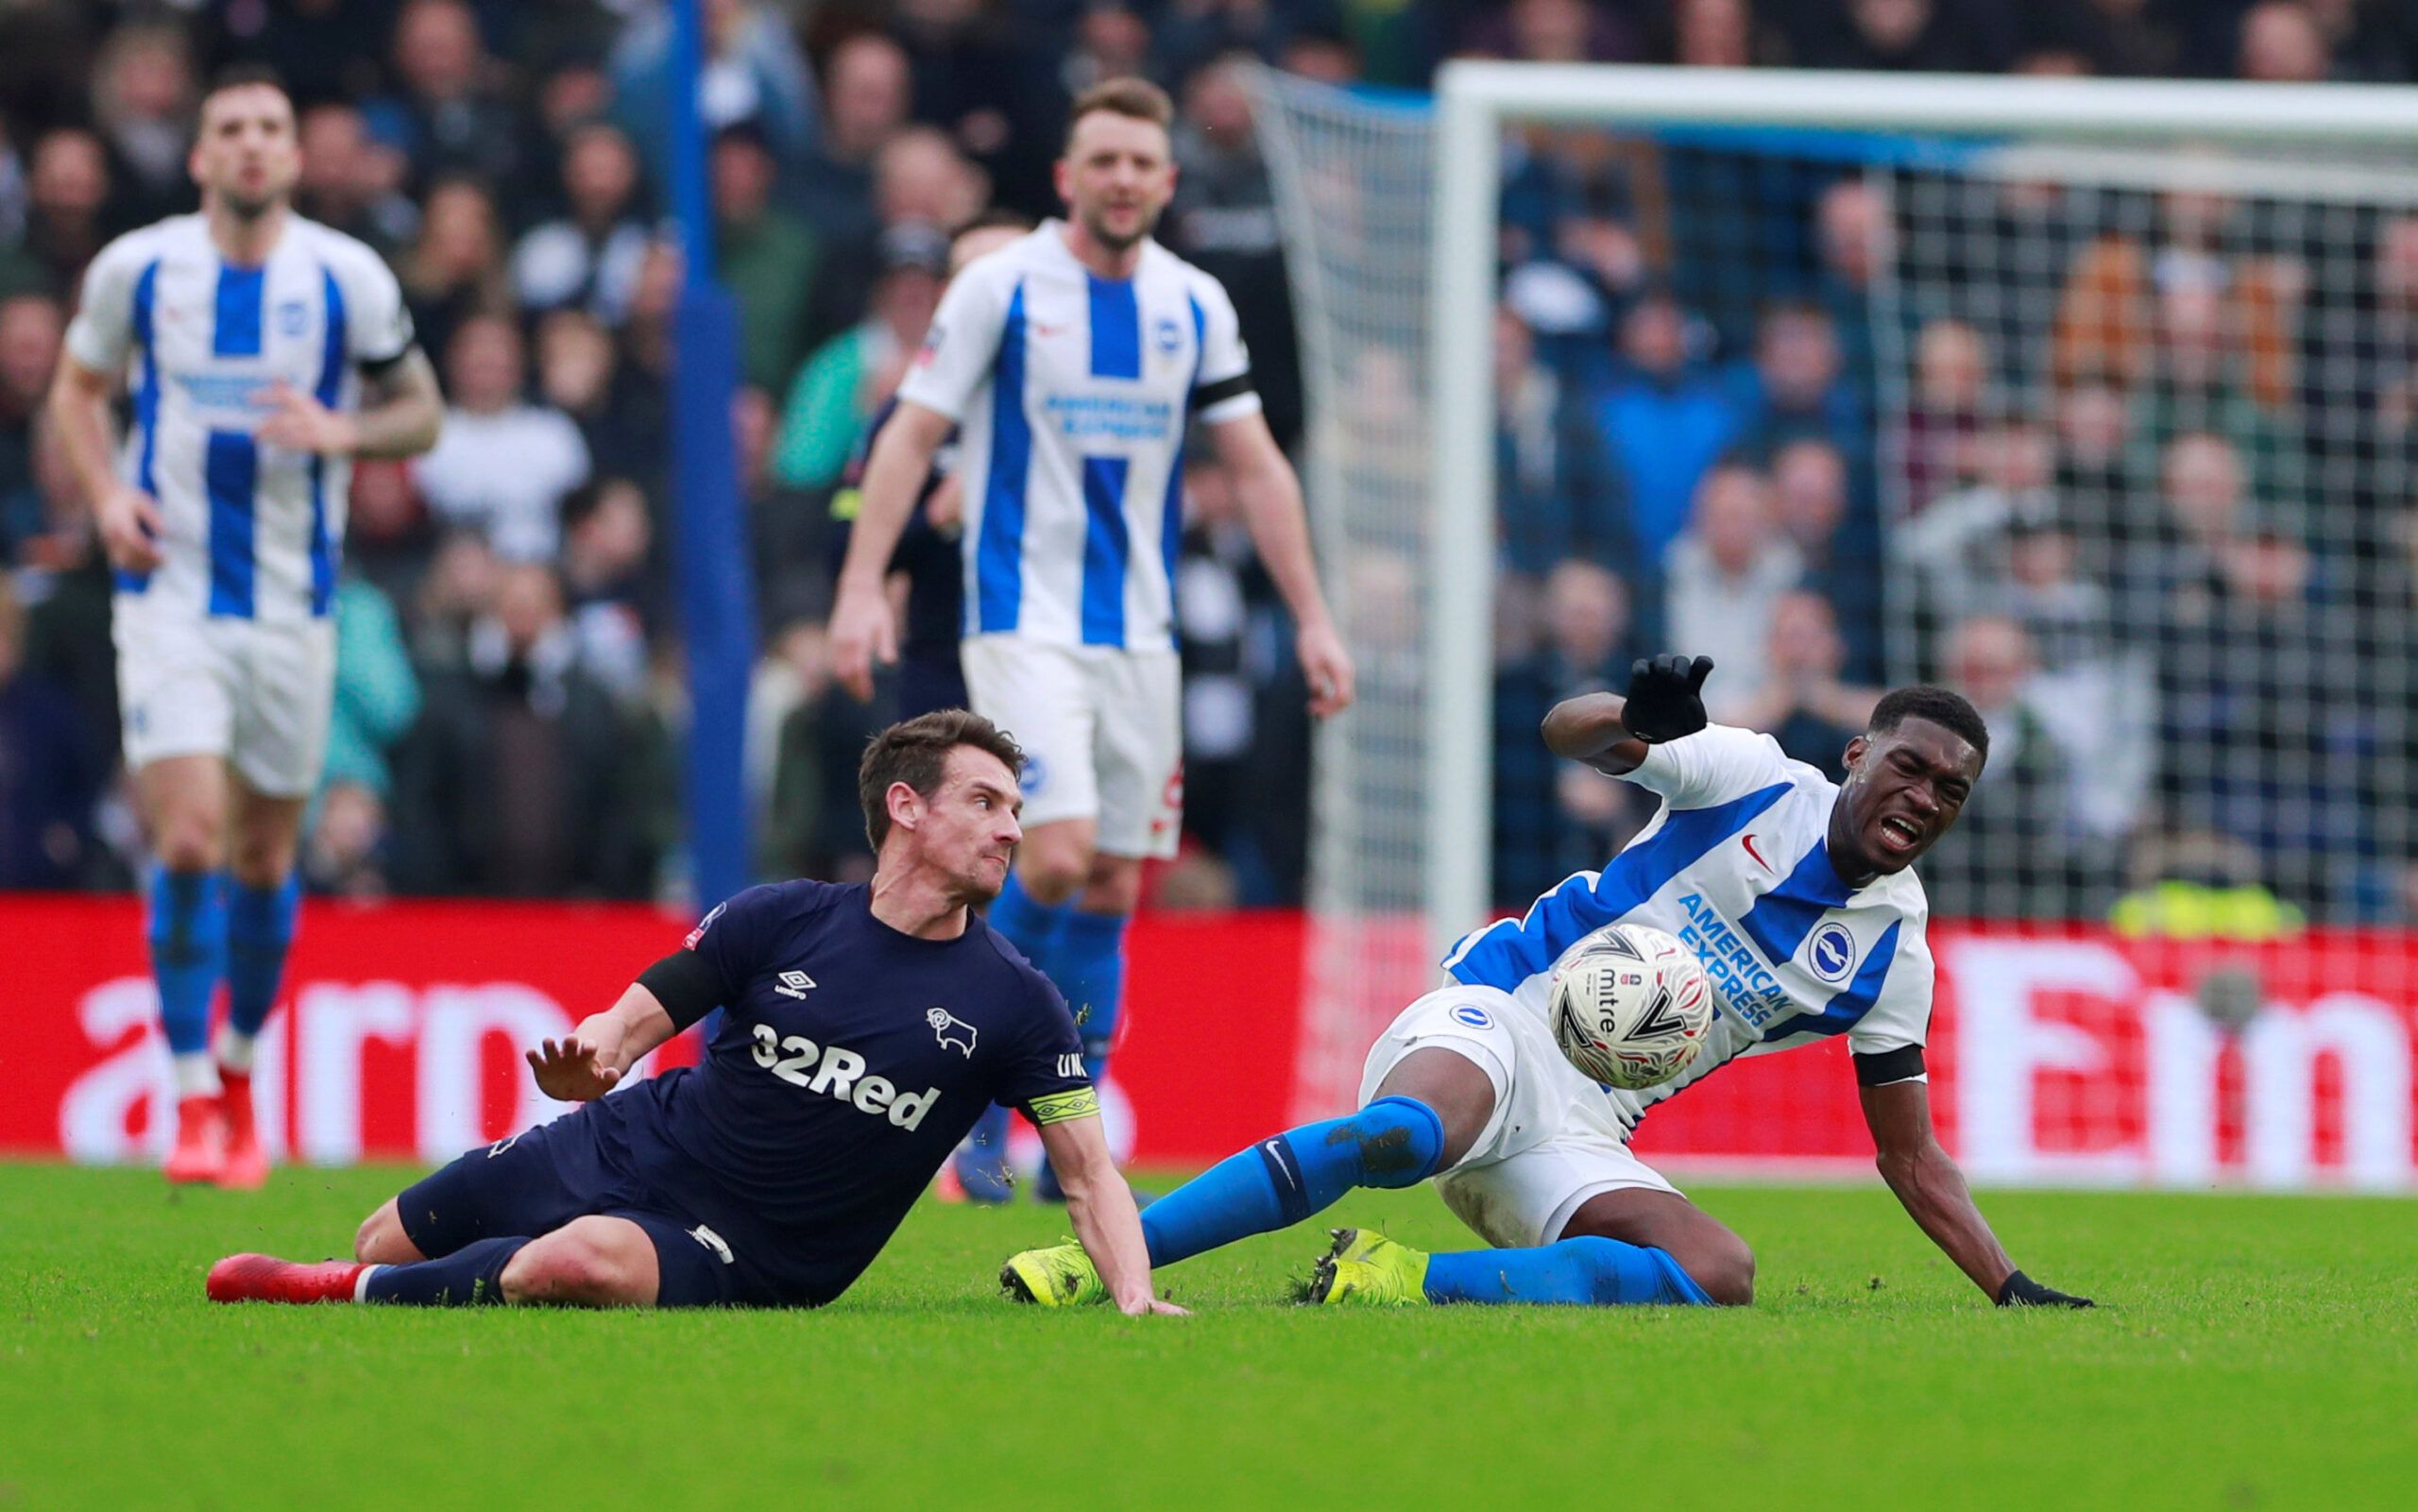 Soccer Football - FA Cup Fifth Round - Brighton &amp; Hove Albion v Derby County - The American Express Community Stadium, Brighton, Britain - February 16, 2019  Brighton's Yves Bissouma in action with Derby County's Craig Bryson   Action Images via Reuters/Andrew Couldridge